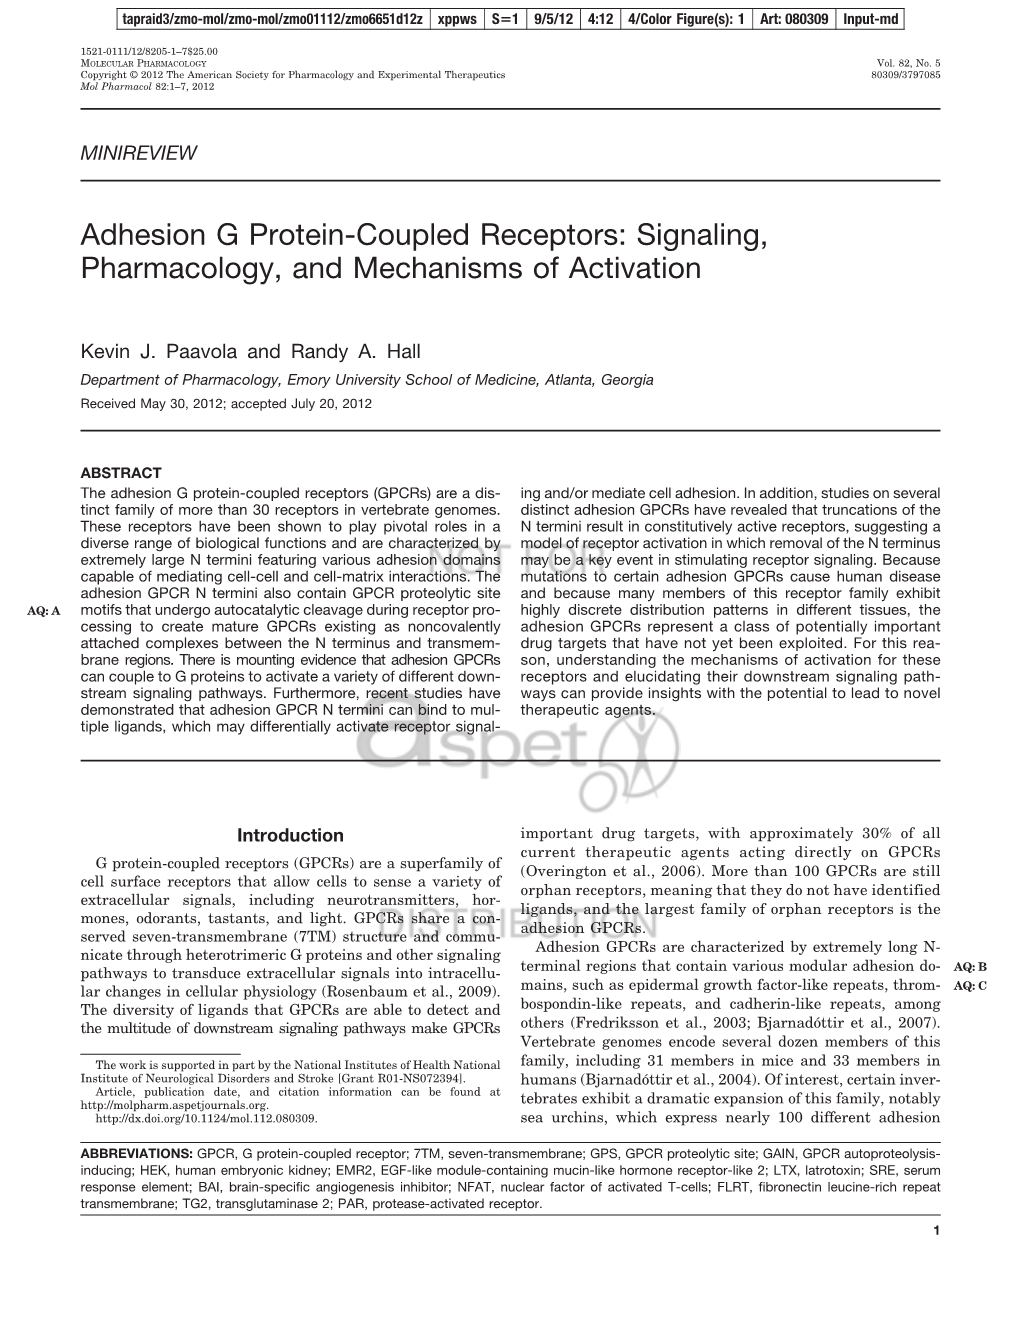 Adhesion G Protein-Coupled Receptors: Signaling, Pharmacology, and Mechanisms of Activation